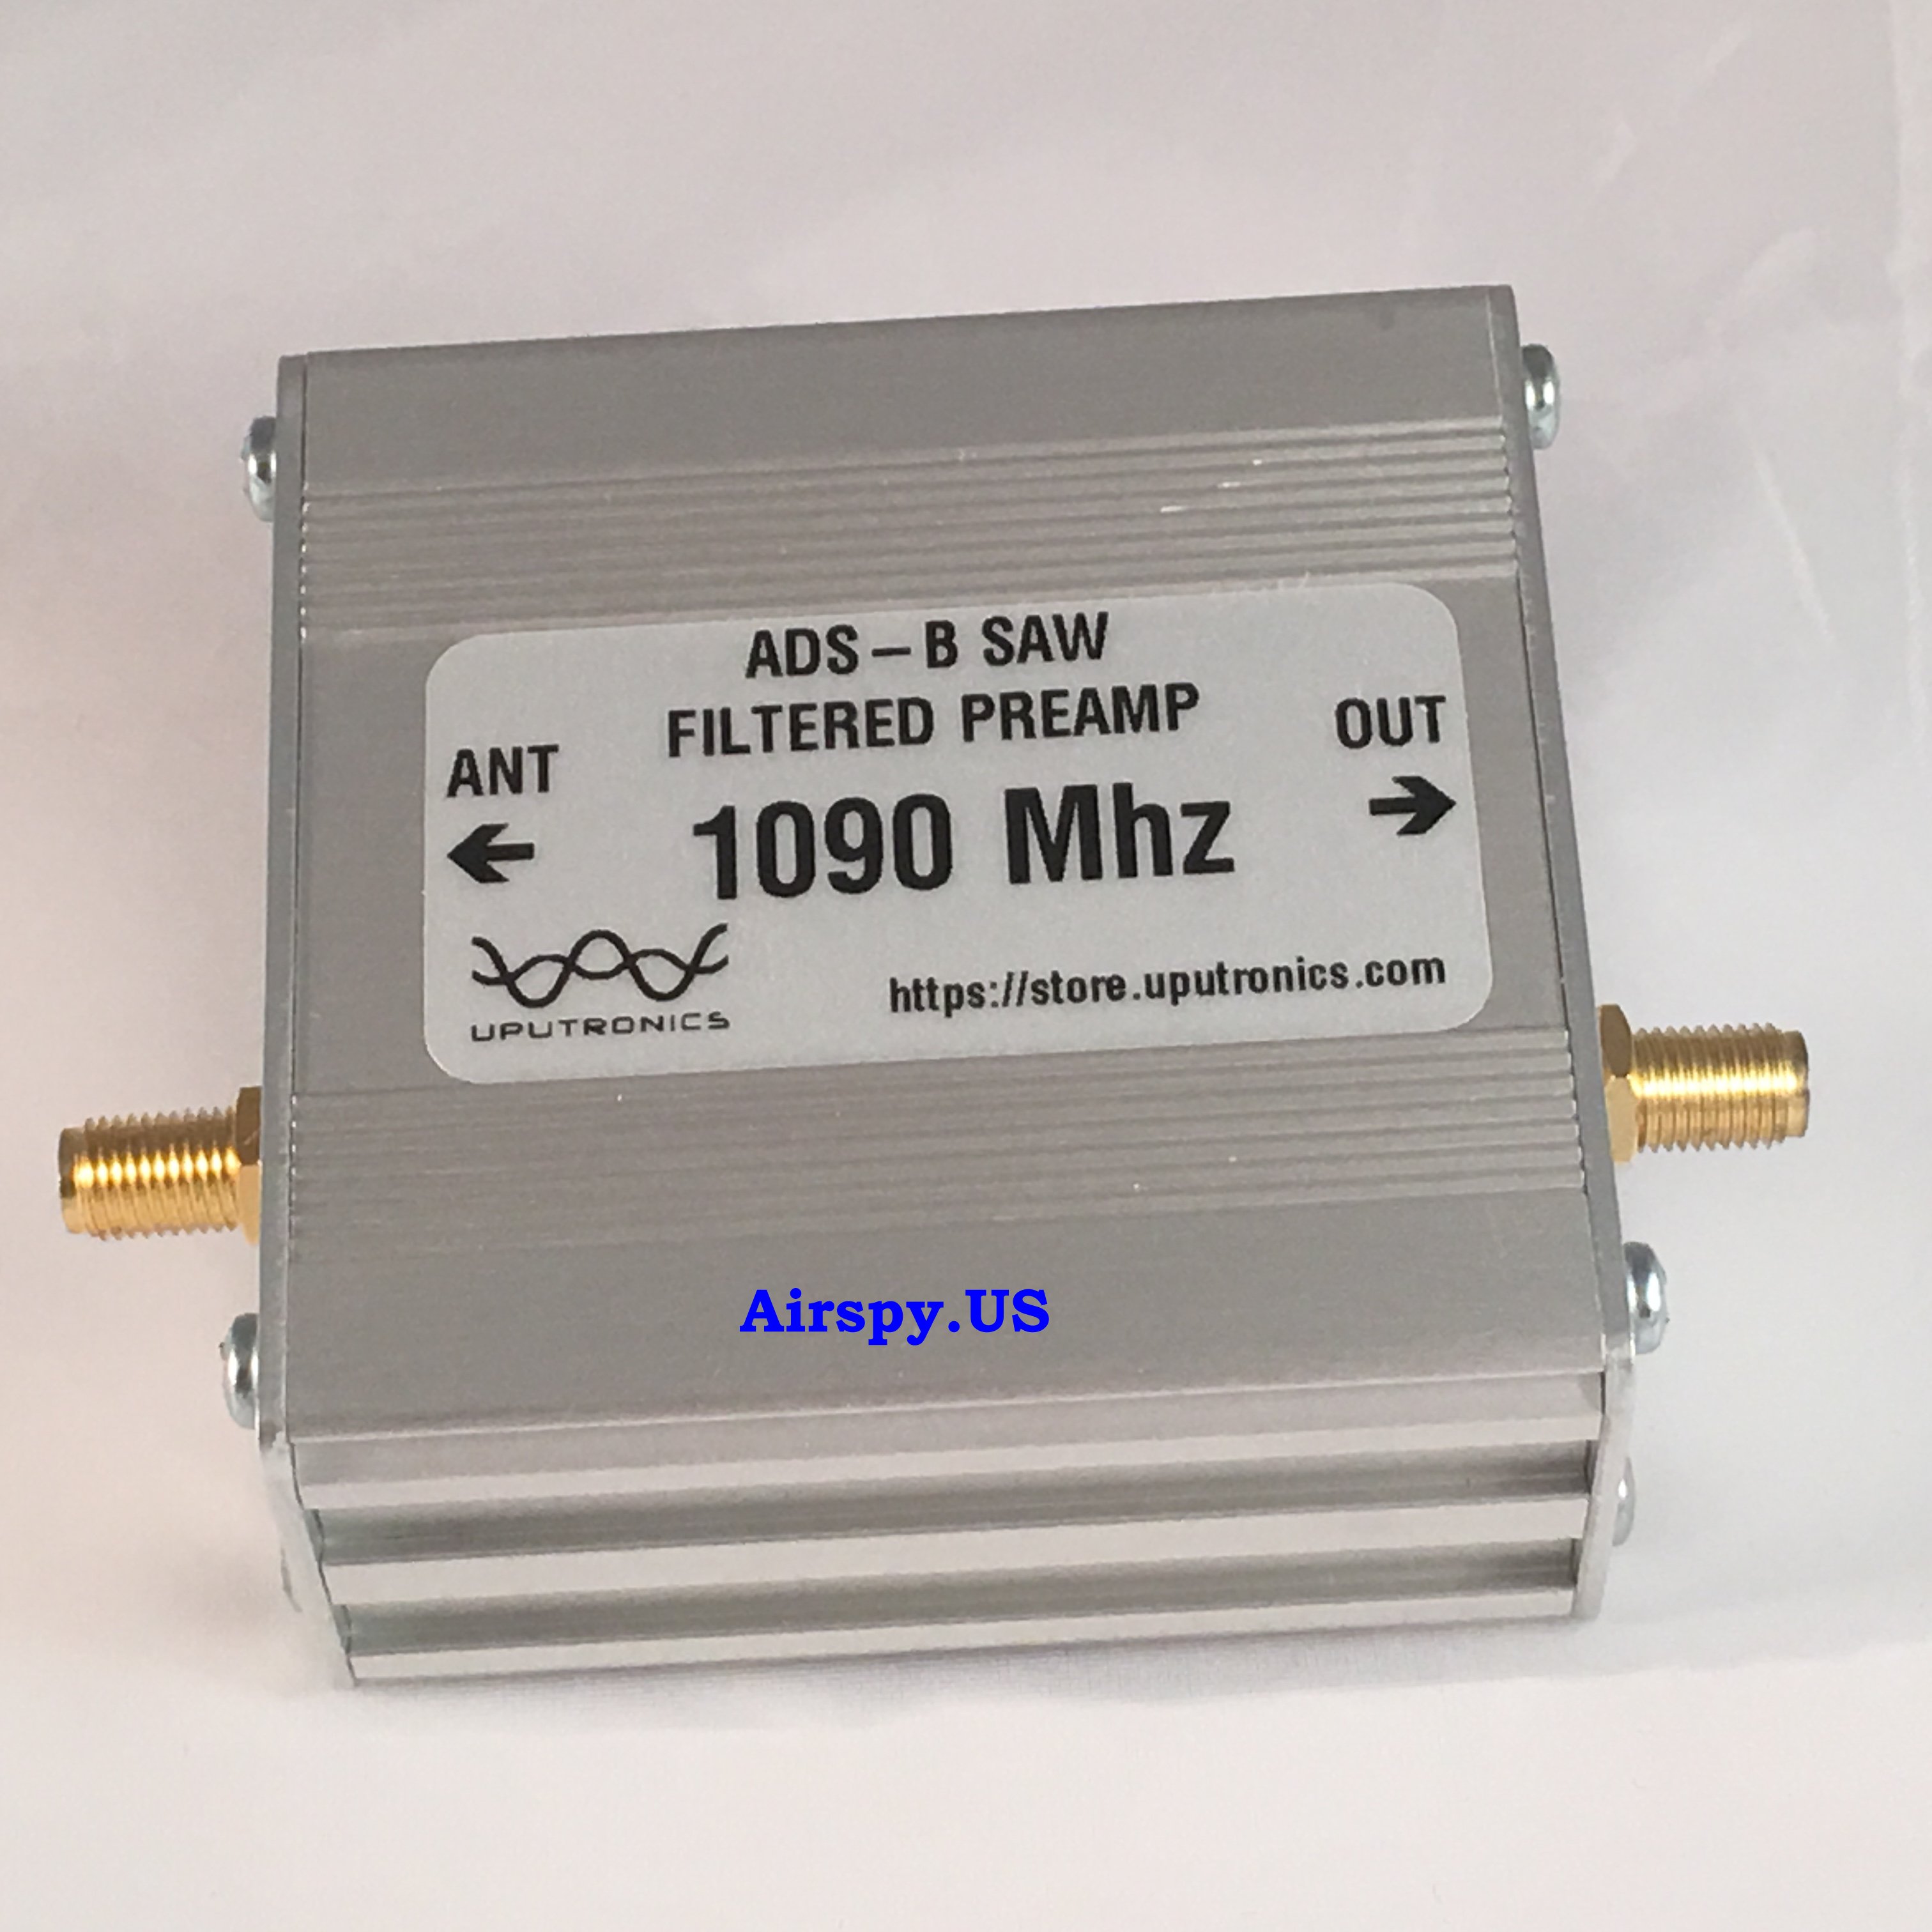 Filtered ADS-B Ultra Low Noise Pre-Amplifier LNA 1090 MHz  *15 dB* Gain 15dB